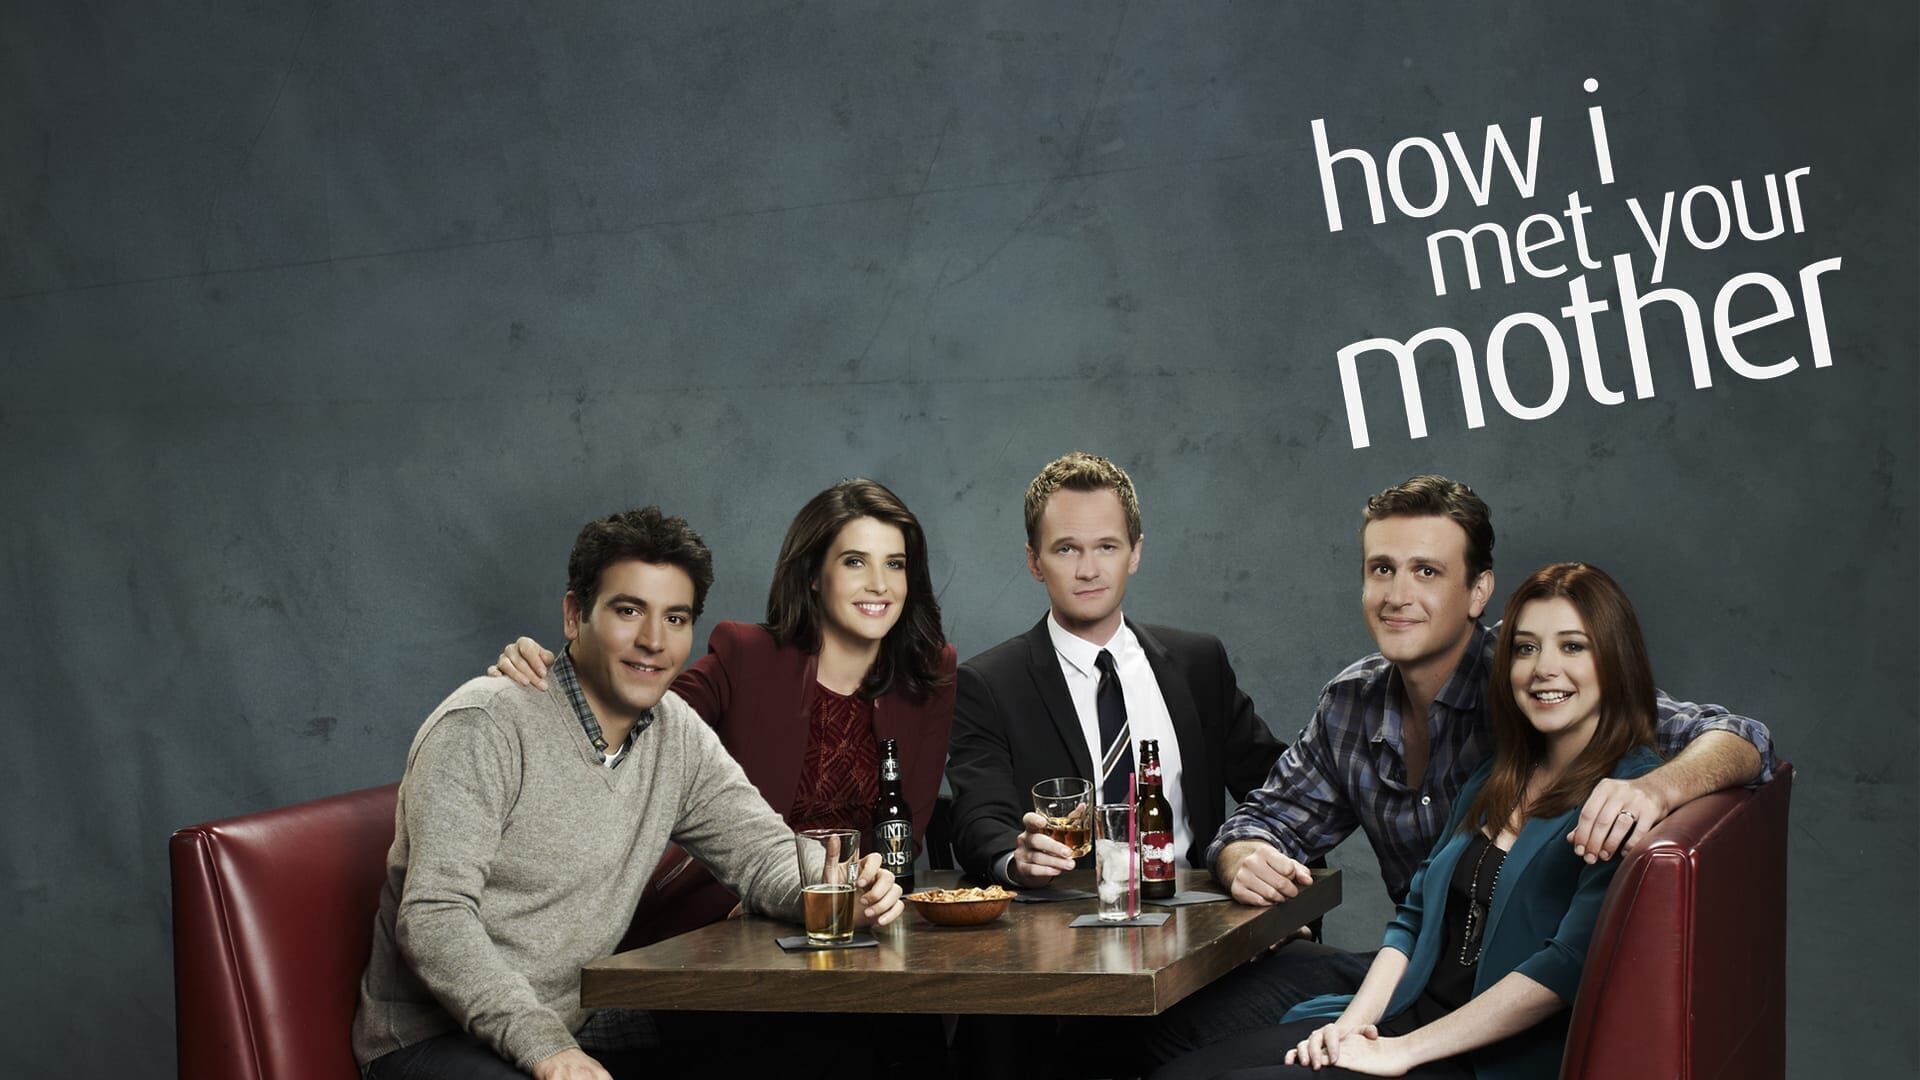 How I Met Your Mother - Symphony of Illumination